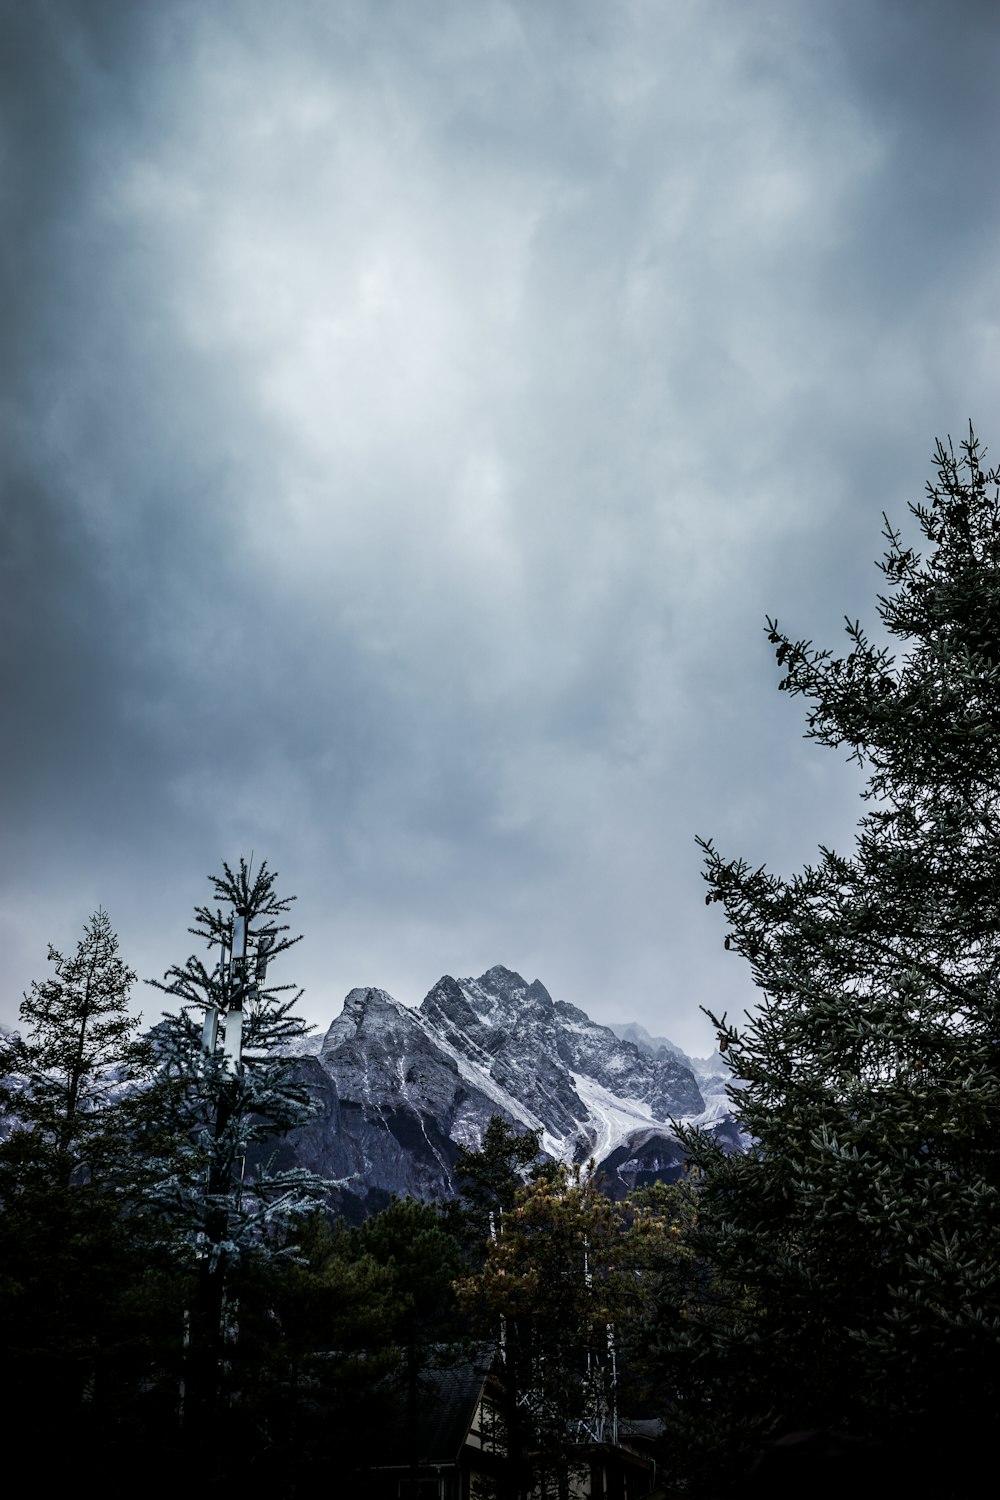 snow covered mountain under gray sky at daytime